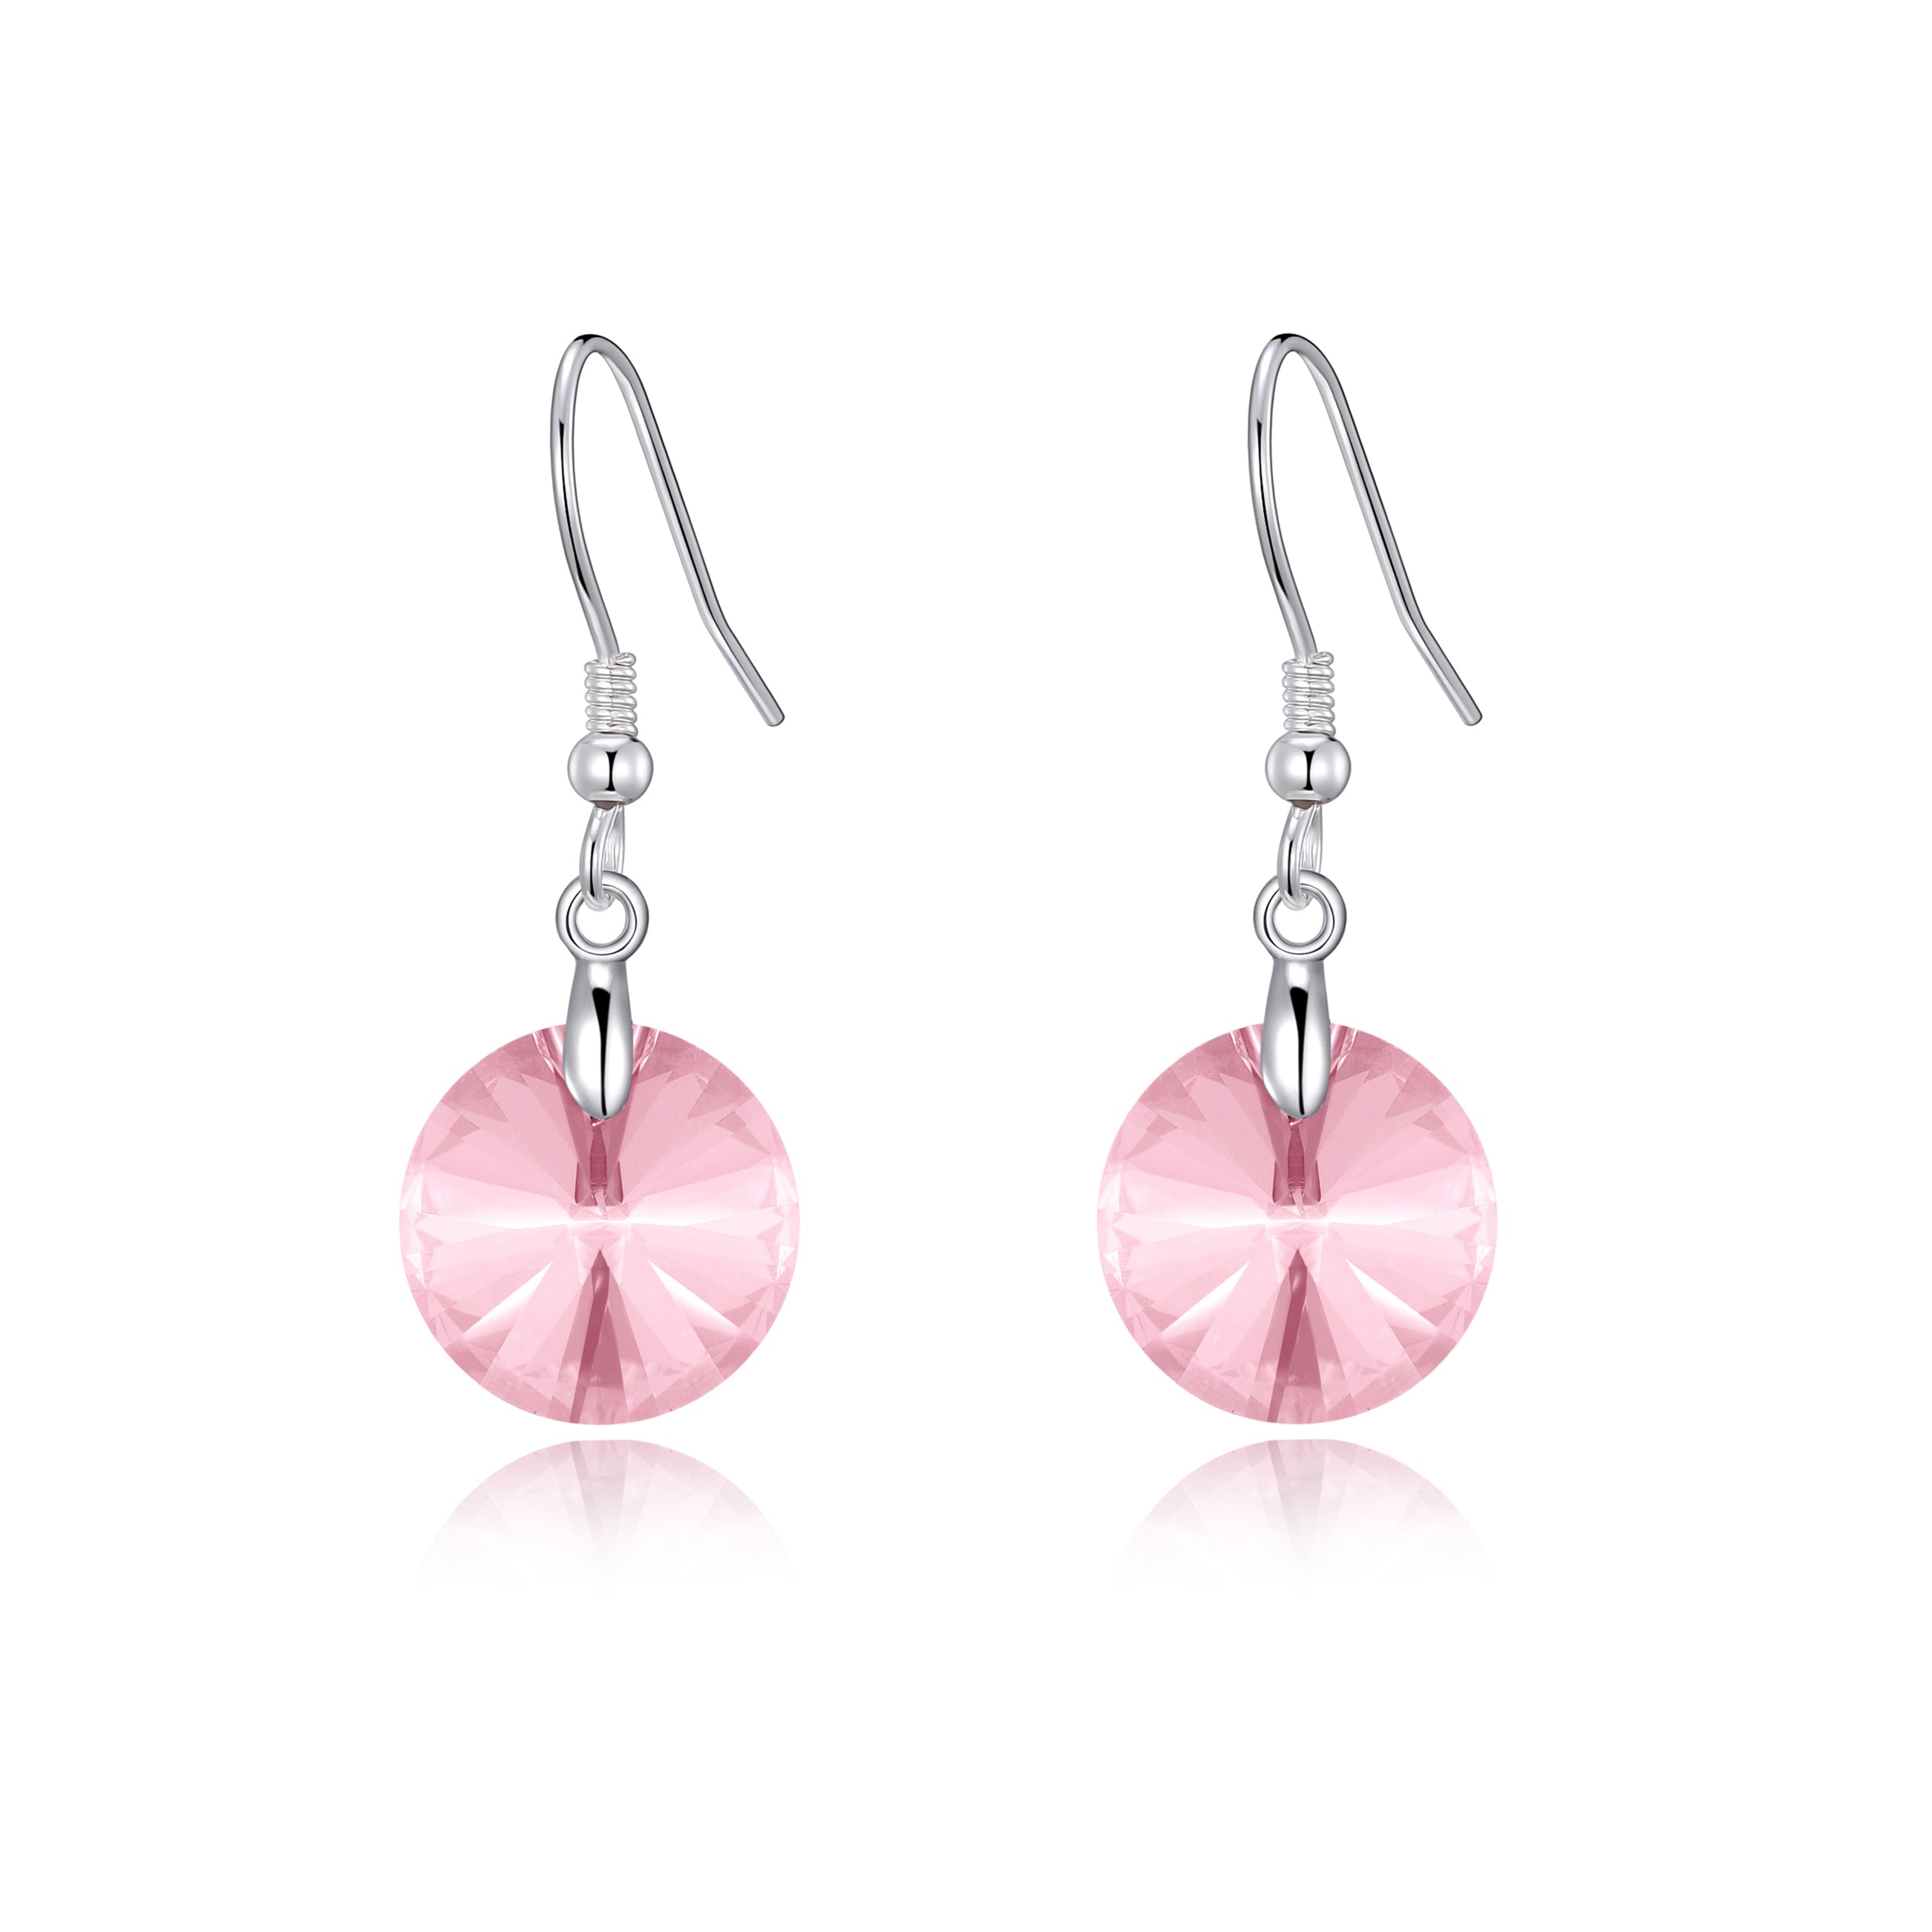 Sterling Silver Light Rose Earrings Created with Zircondia® Crystals by Philip Jones Jewellery